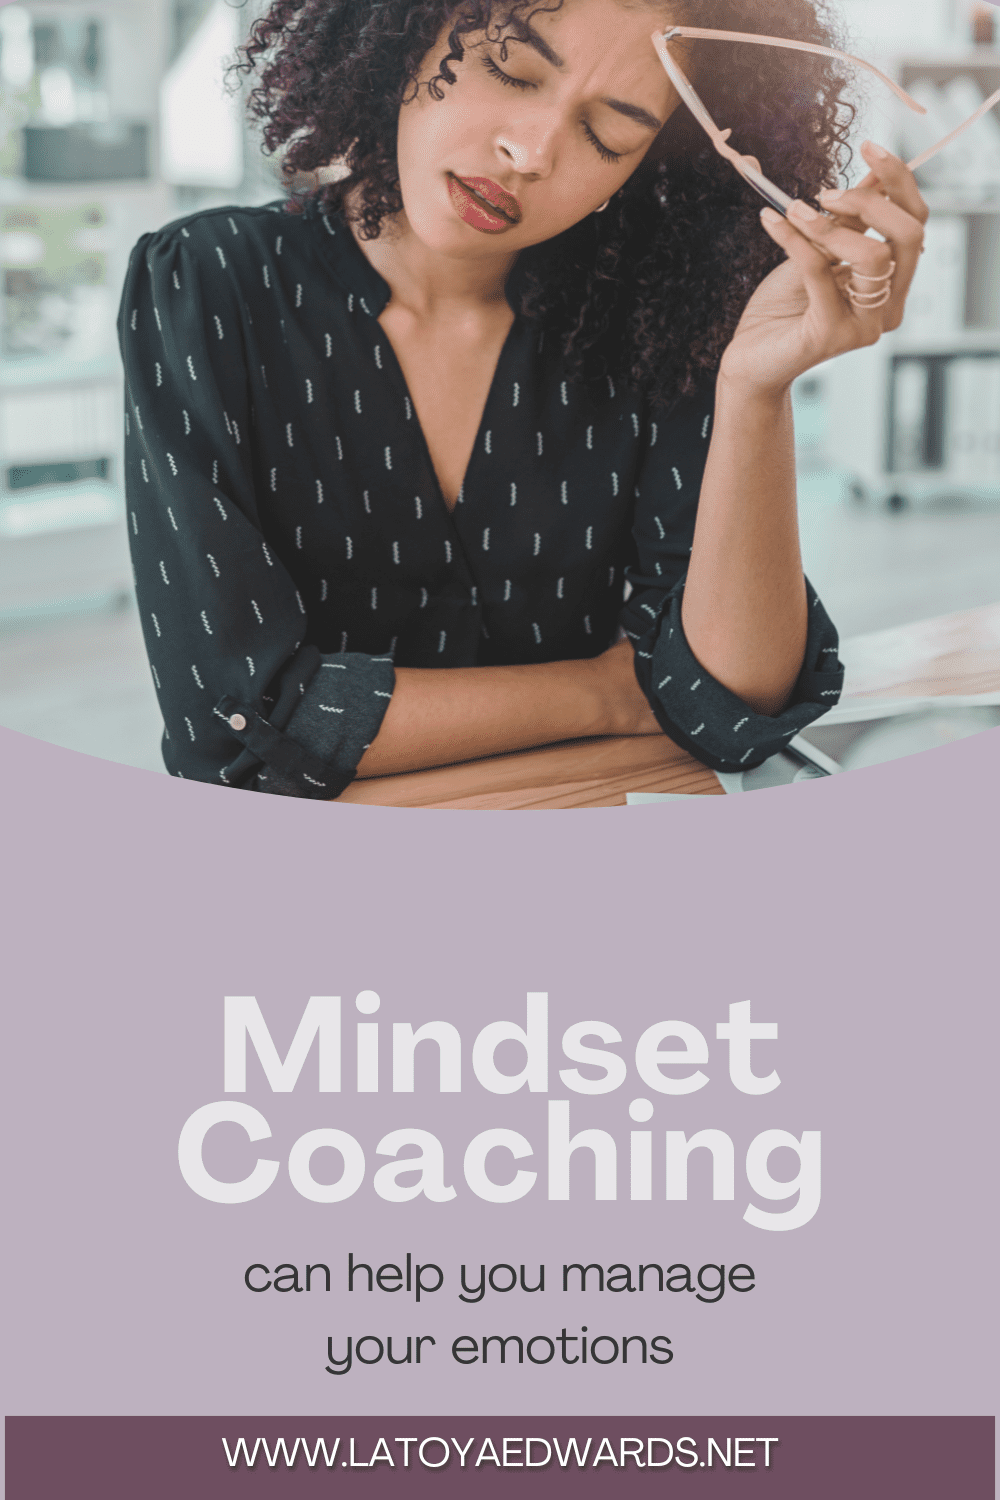 Curious about how mindset coaching works? If you are trying to find ways to manage your emotions coaching might be what you're looking for. With journal-based coaching you can learn how to journal your emotions and thoughts and how to release those emotions. If you're looking for tips on how to feel your feelings without the overwhelm visit the full blog post to read more about my 3 step coaching framework.